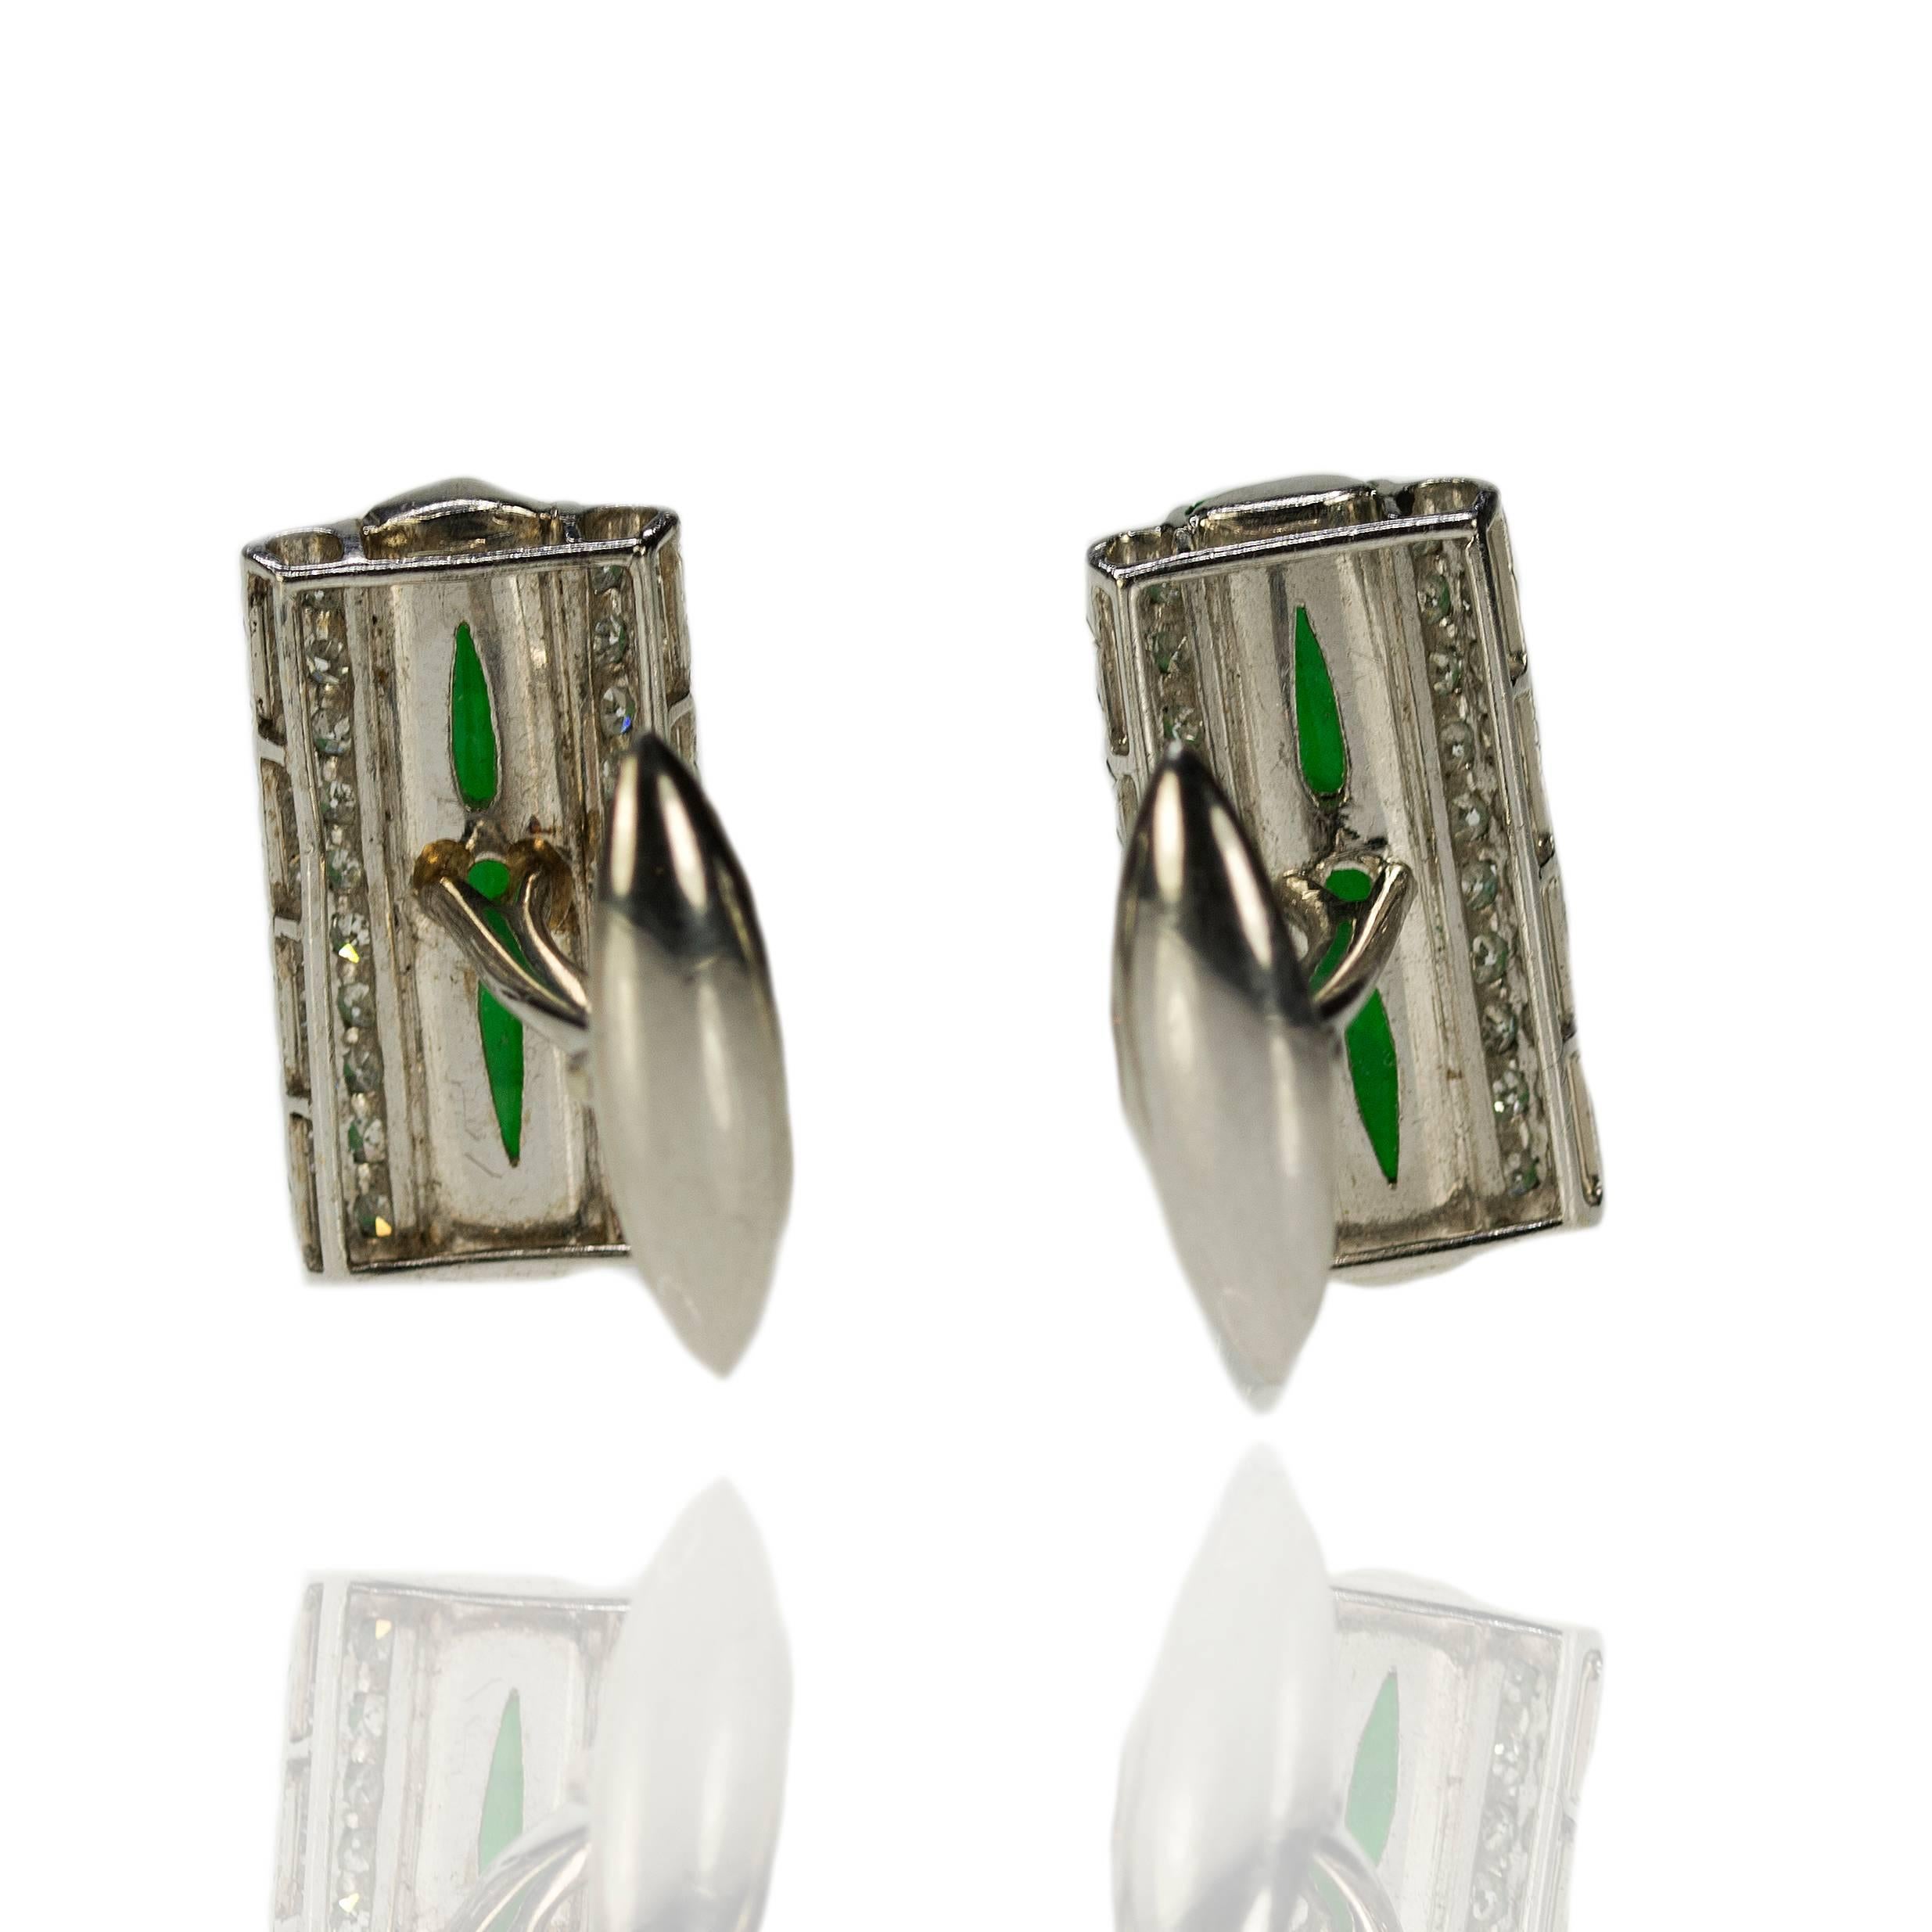 Platinum Imperial Jade Cufflinks 2 GIA certified Jade cabochons weighing approximately 12.00 carats and approximately 1.00 carats of modern round brilliant diamonds, 18.03g